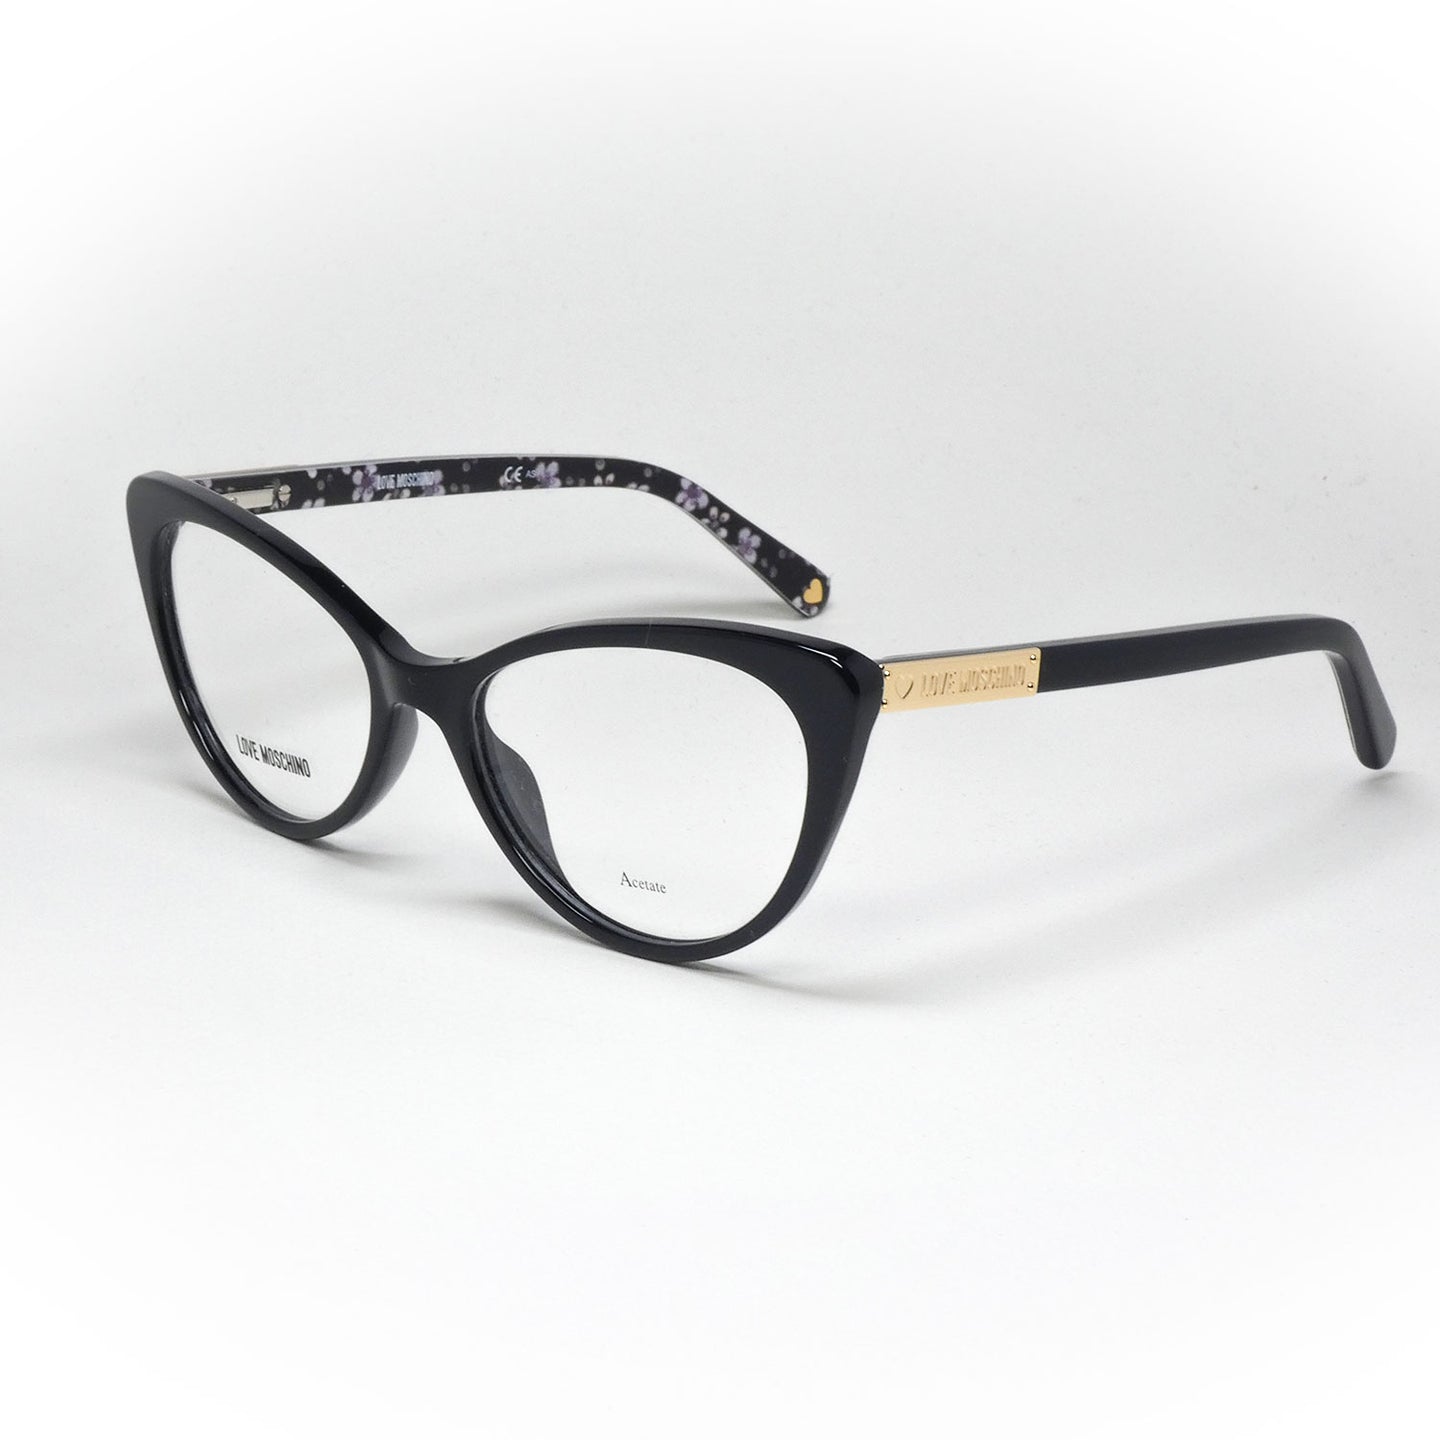 glasses moschino love model 573 color 807 angled view